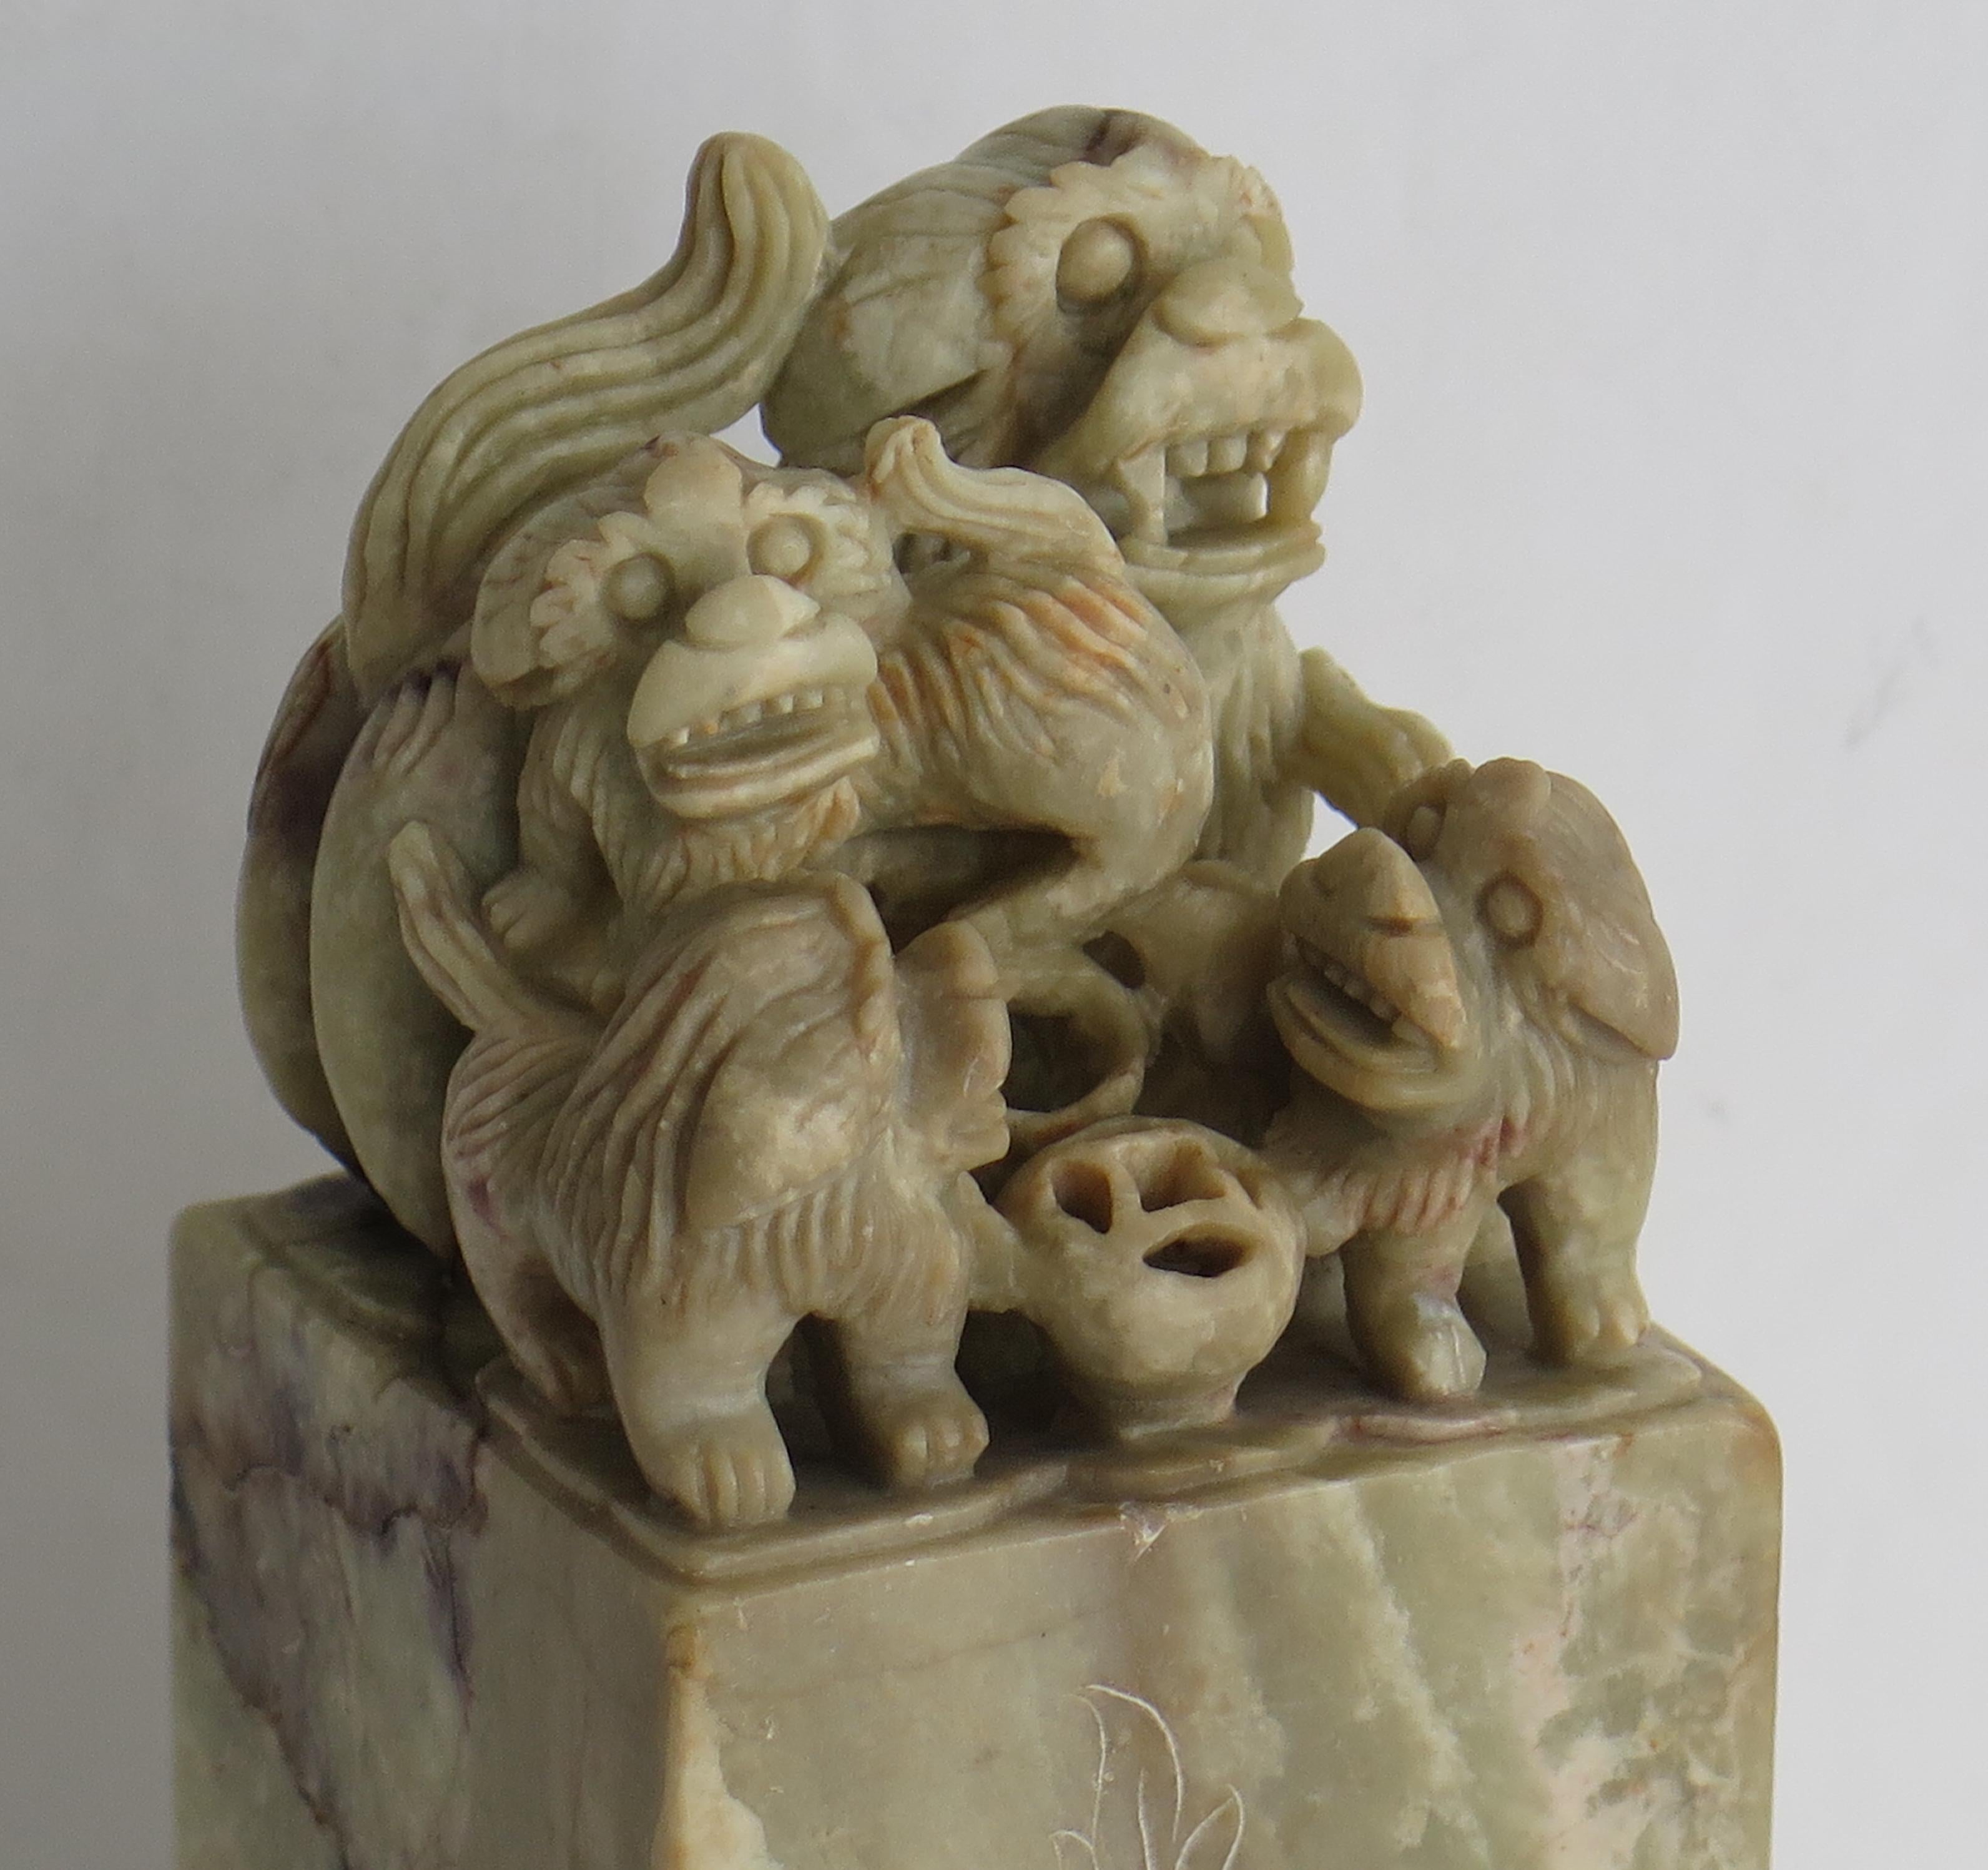 This is a good Chinese soapstone carving made in China during the 19th Century, Qing period.

The piece is shaped like a Chinese Seal, having a square vertical column with a hand carved group or family of Foo Dogs at the top of the column. Each of